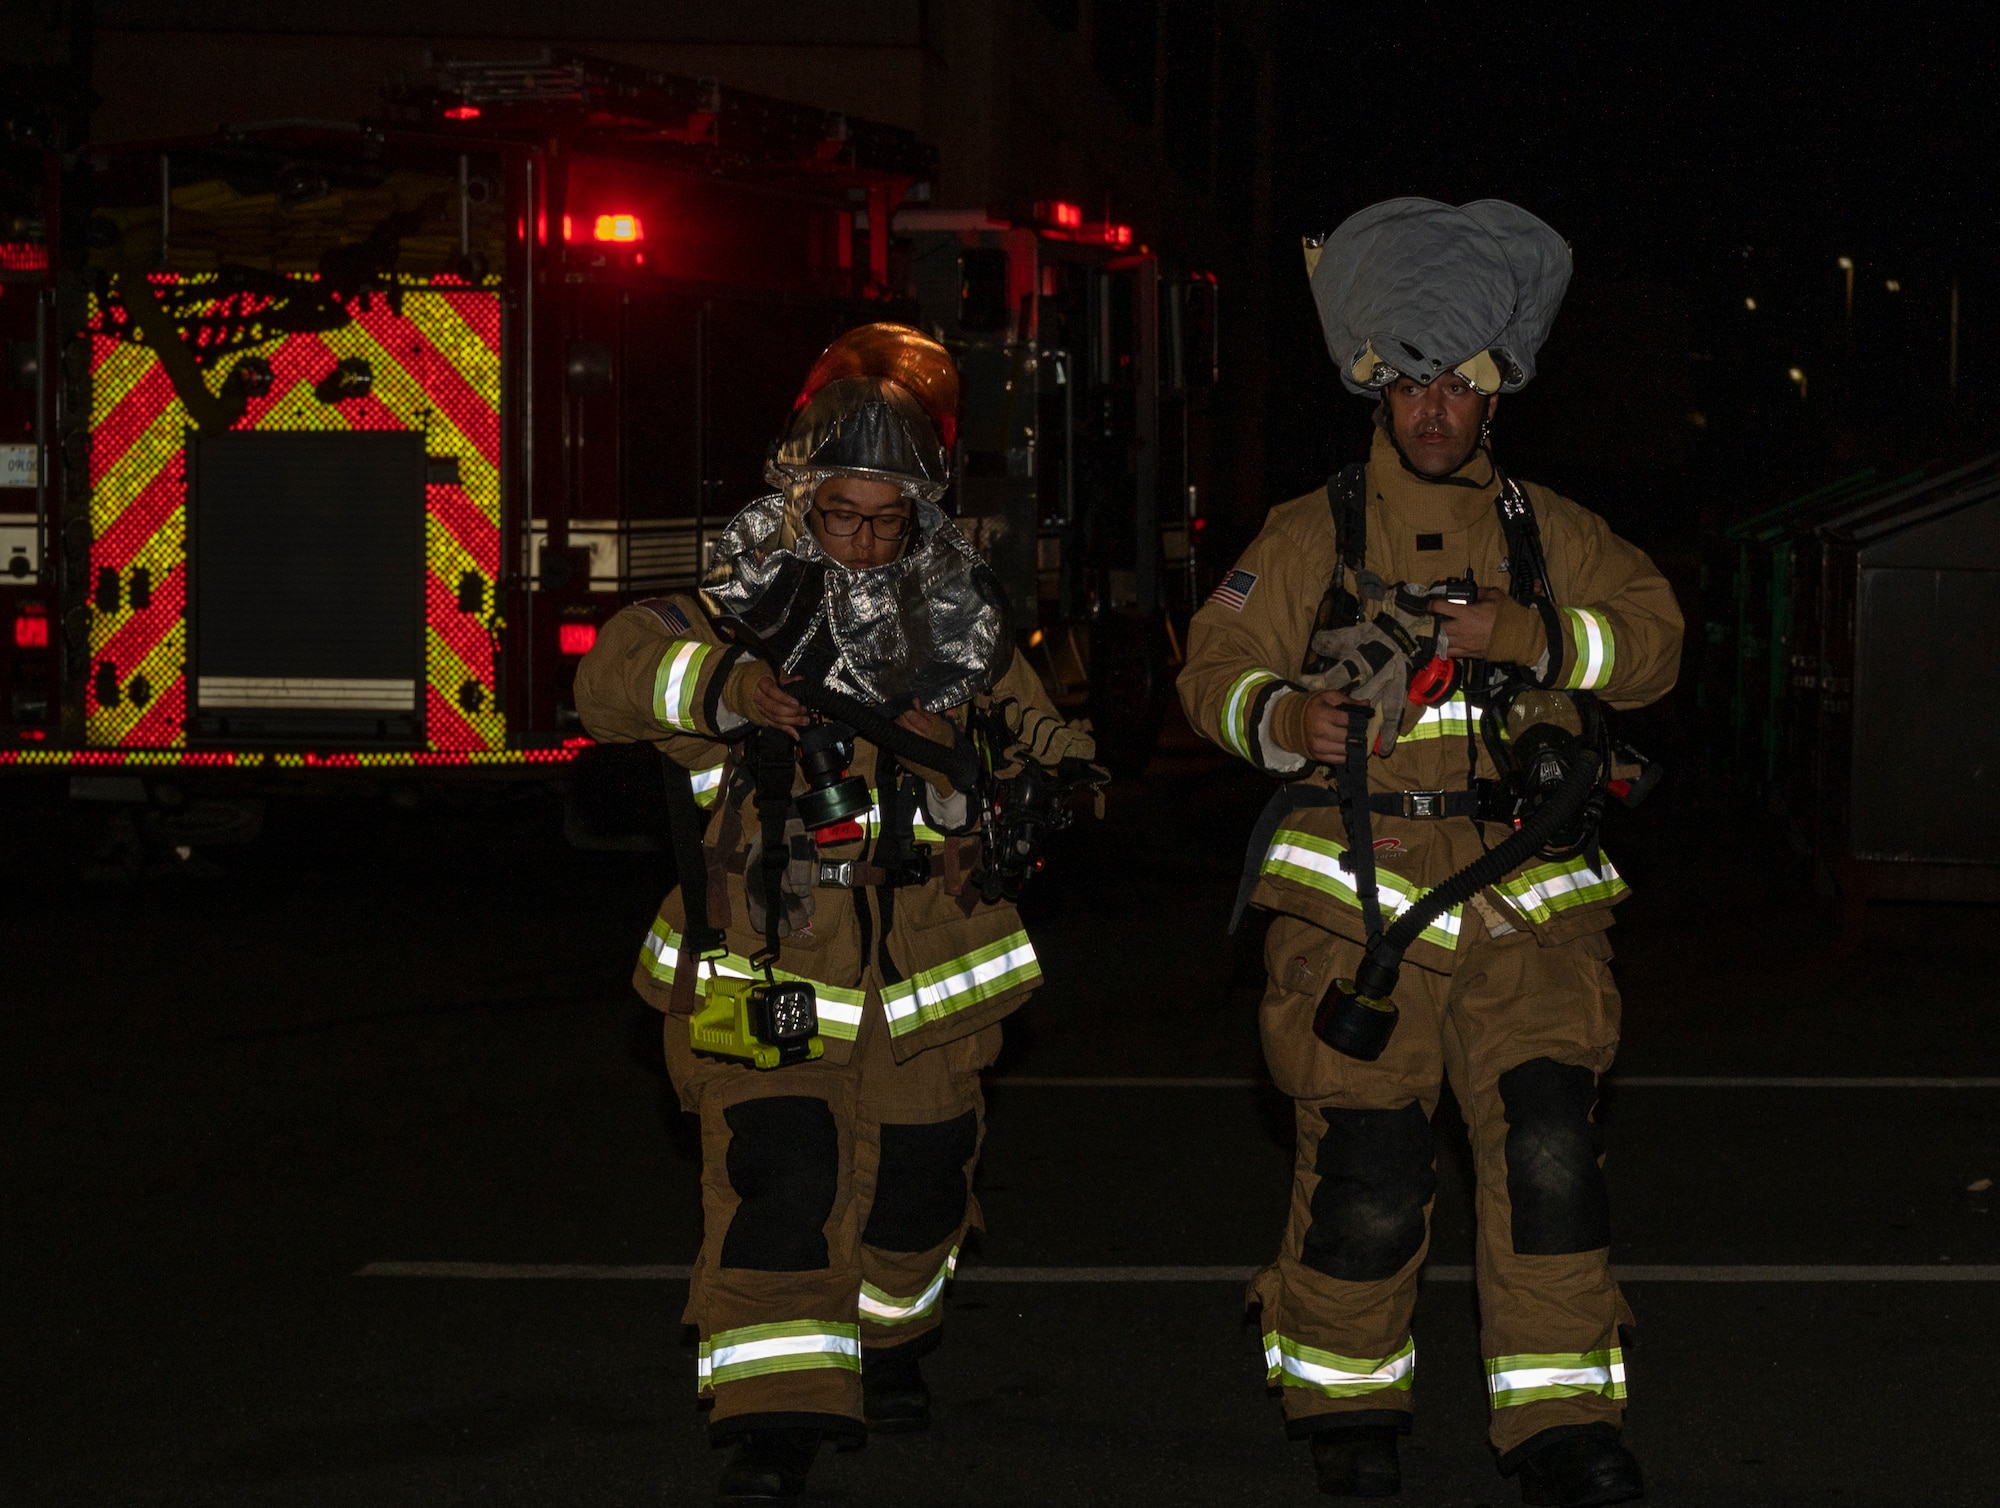 U.S. Air Force Airman 1st Class Joey Vue and U.S. Air Force Staff Sgt. Larry McIver, 51st Civil Engineer Squadron firefighters, don their fire gear during a fire response training scenario at Osan Air Base, Republic of Korea, Sept. 14, 2022.